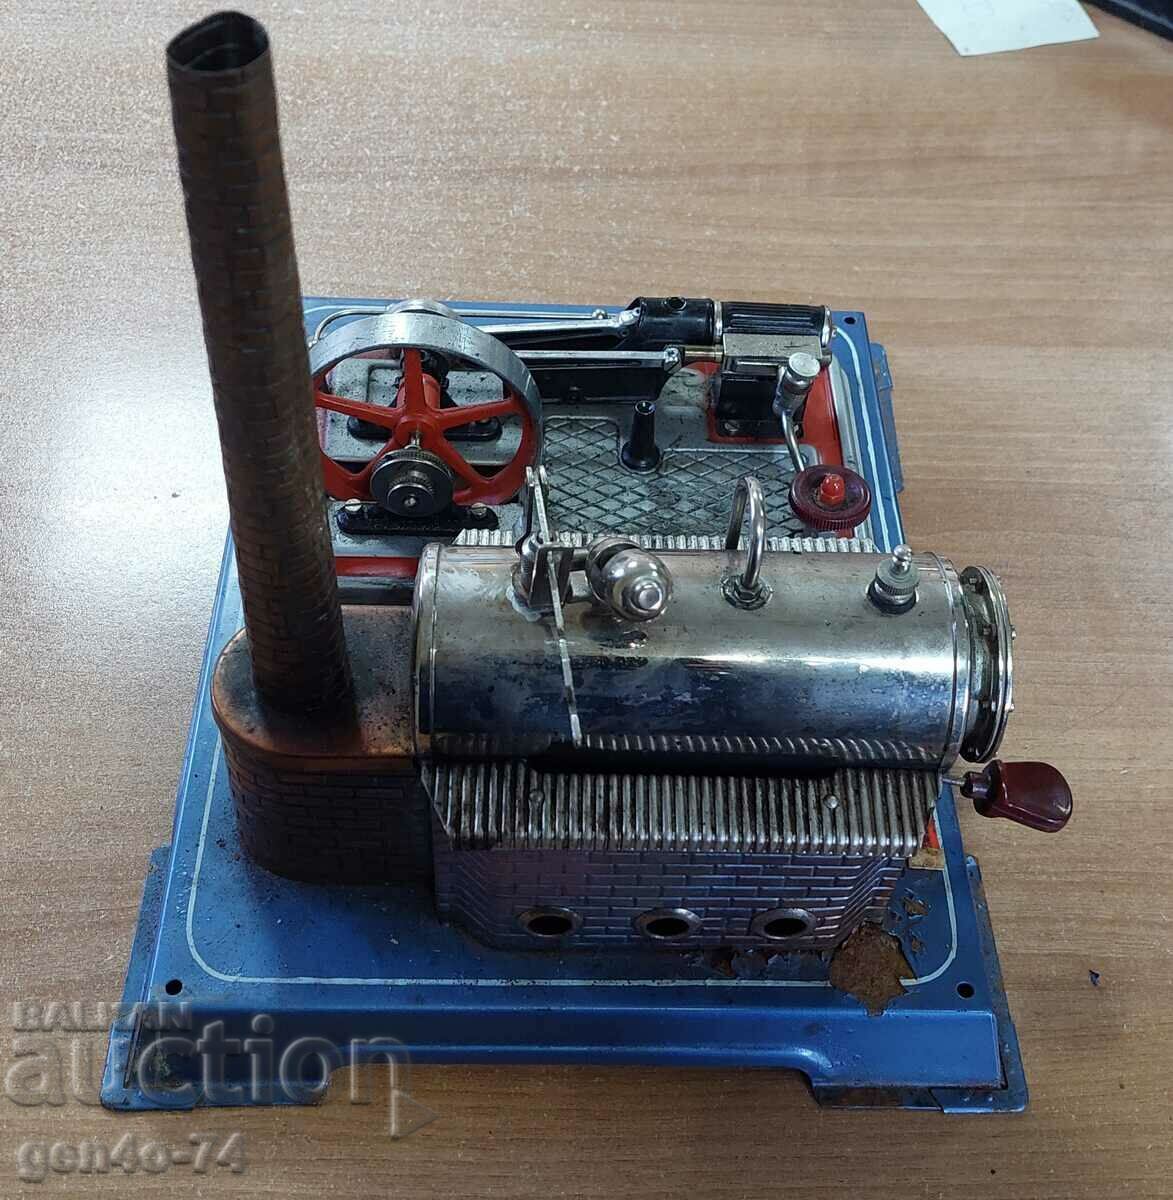 working model of a steam engine